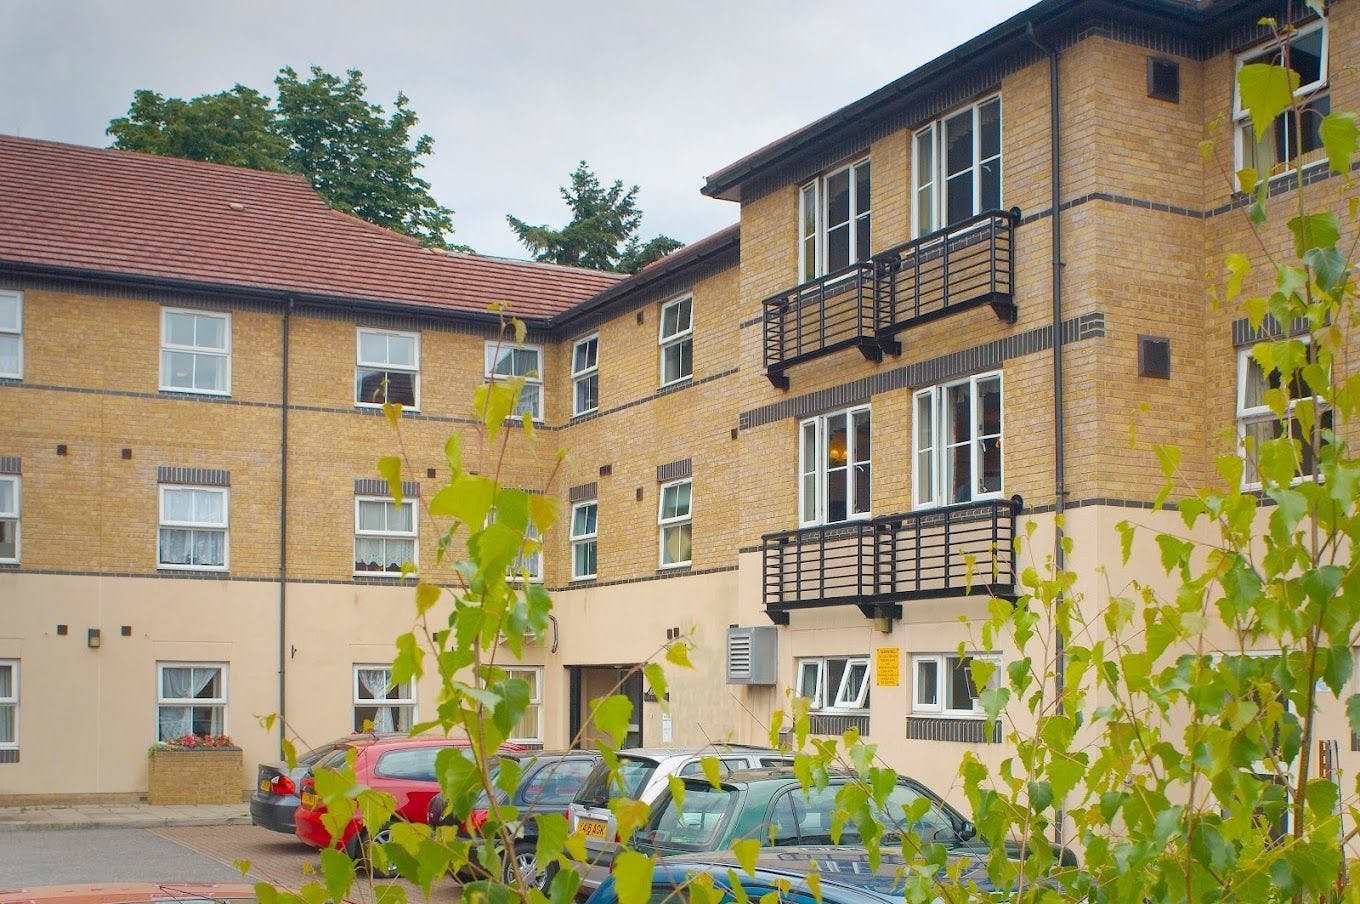 Exterior of Amberley Lodge care home in Purley, London